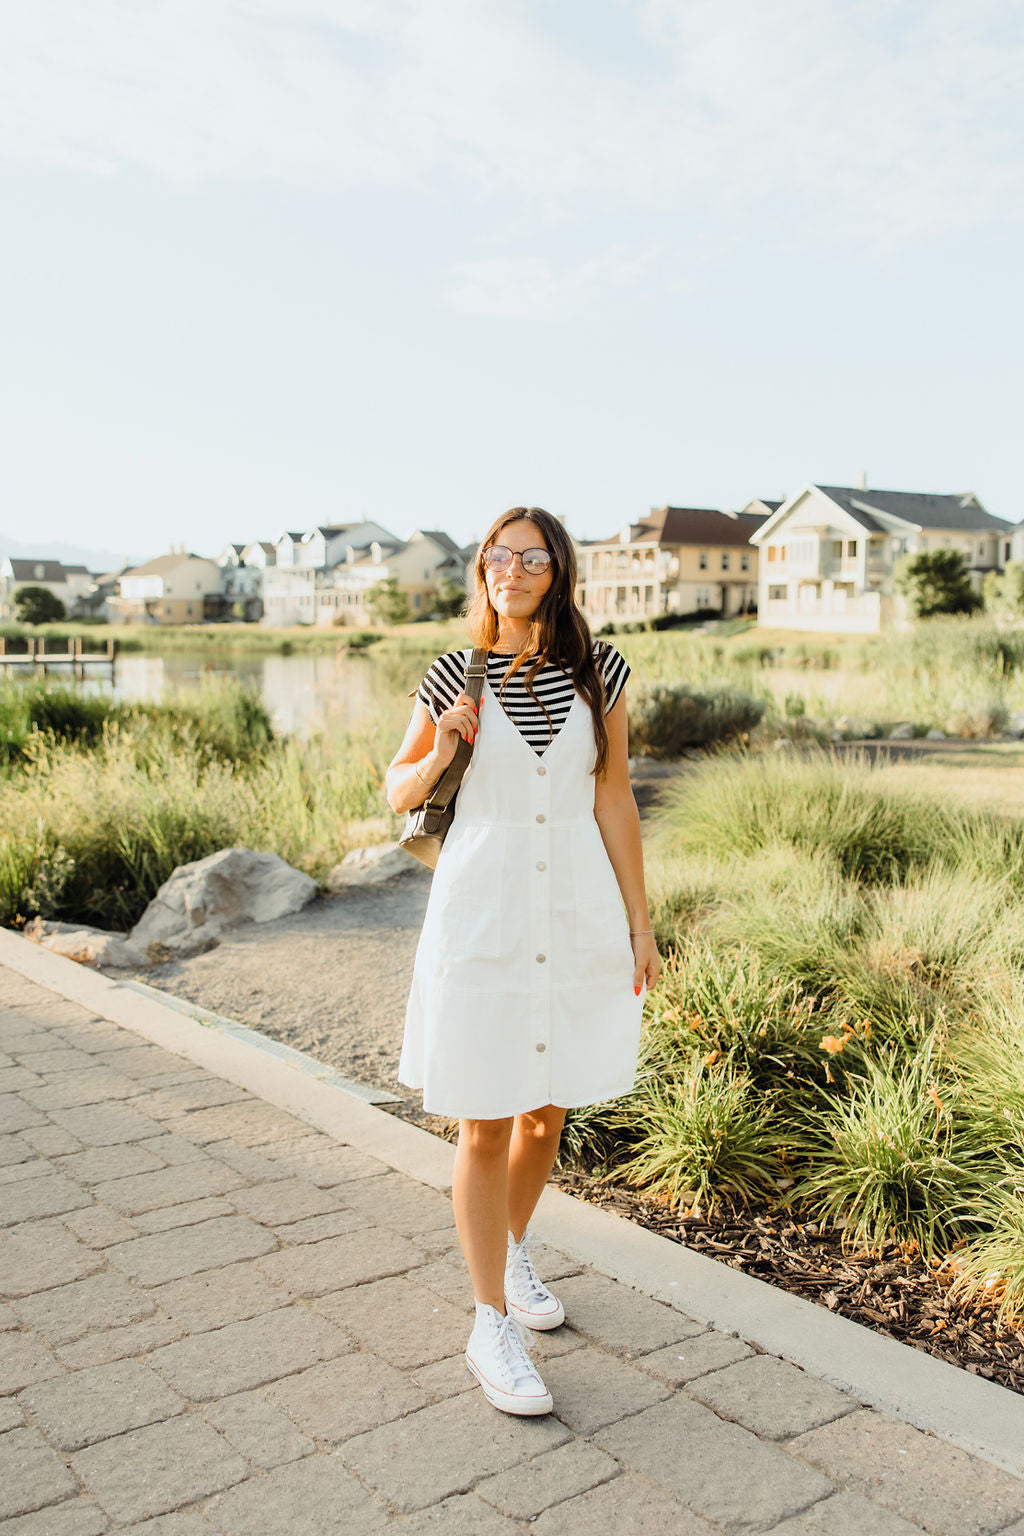 4th of july outfit inspo - Lauren Kay Sims